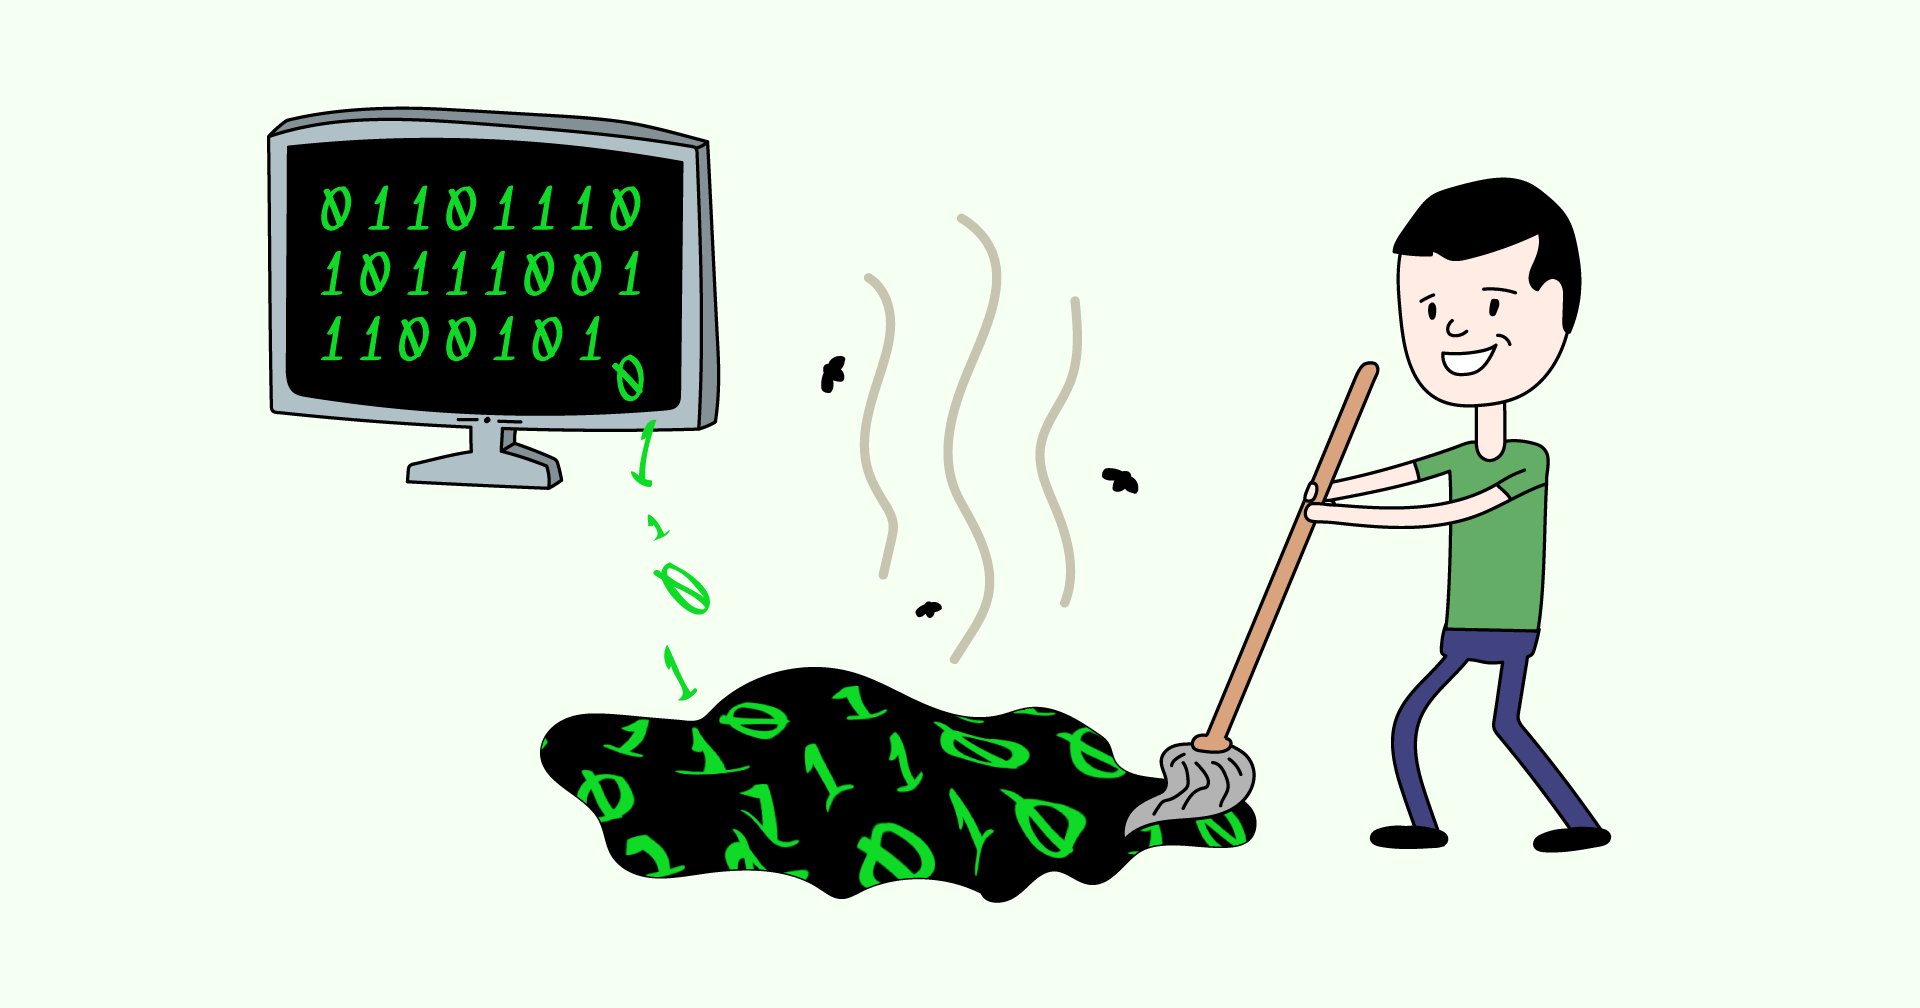 Cleaning up your code diligently